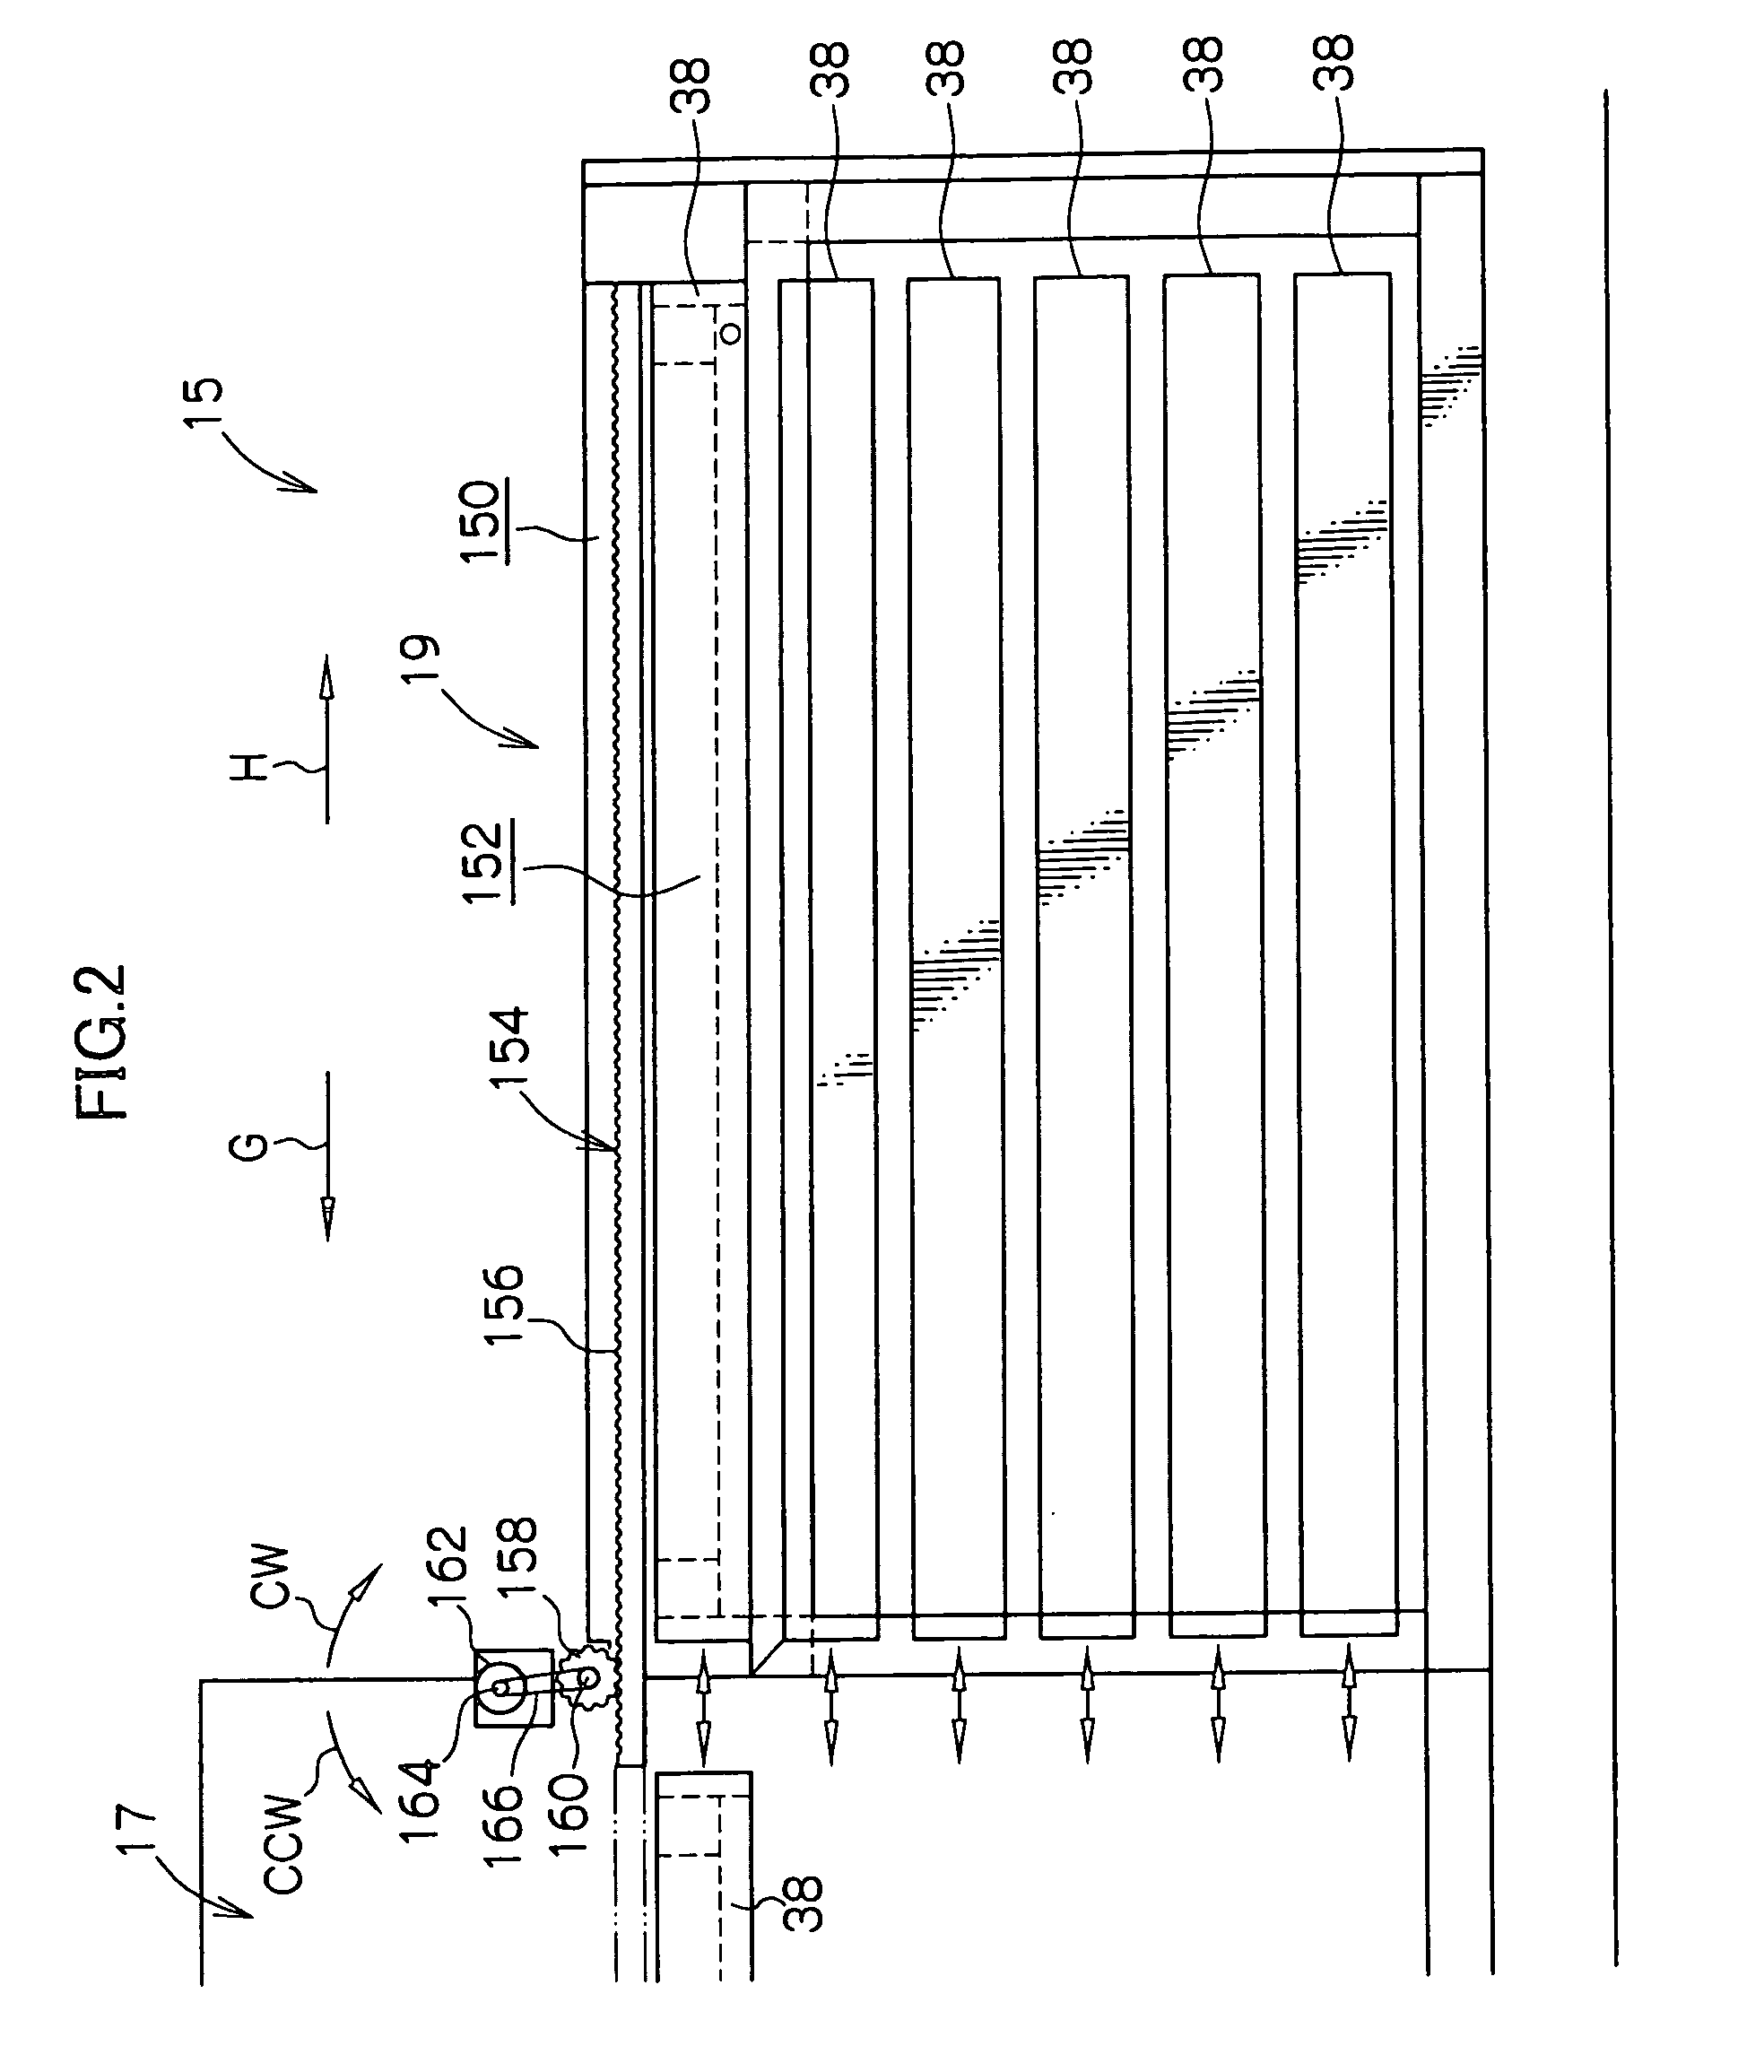 Printing plate removing/supplying device